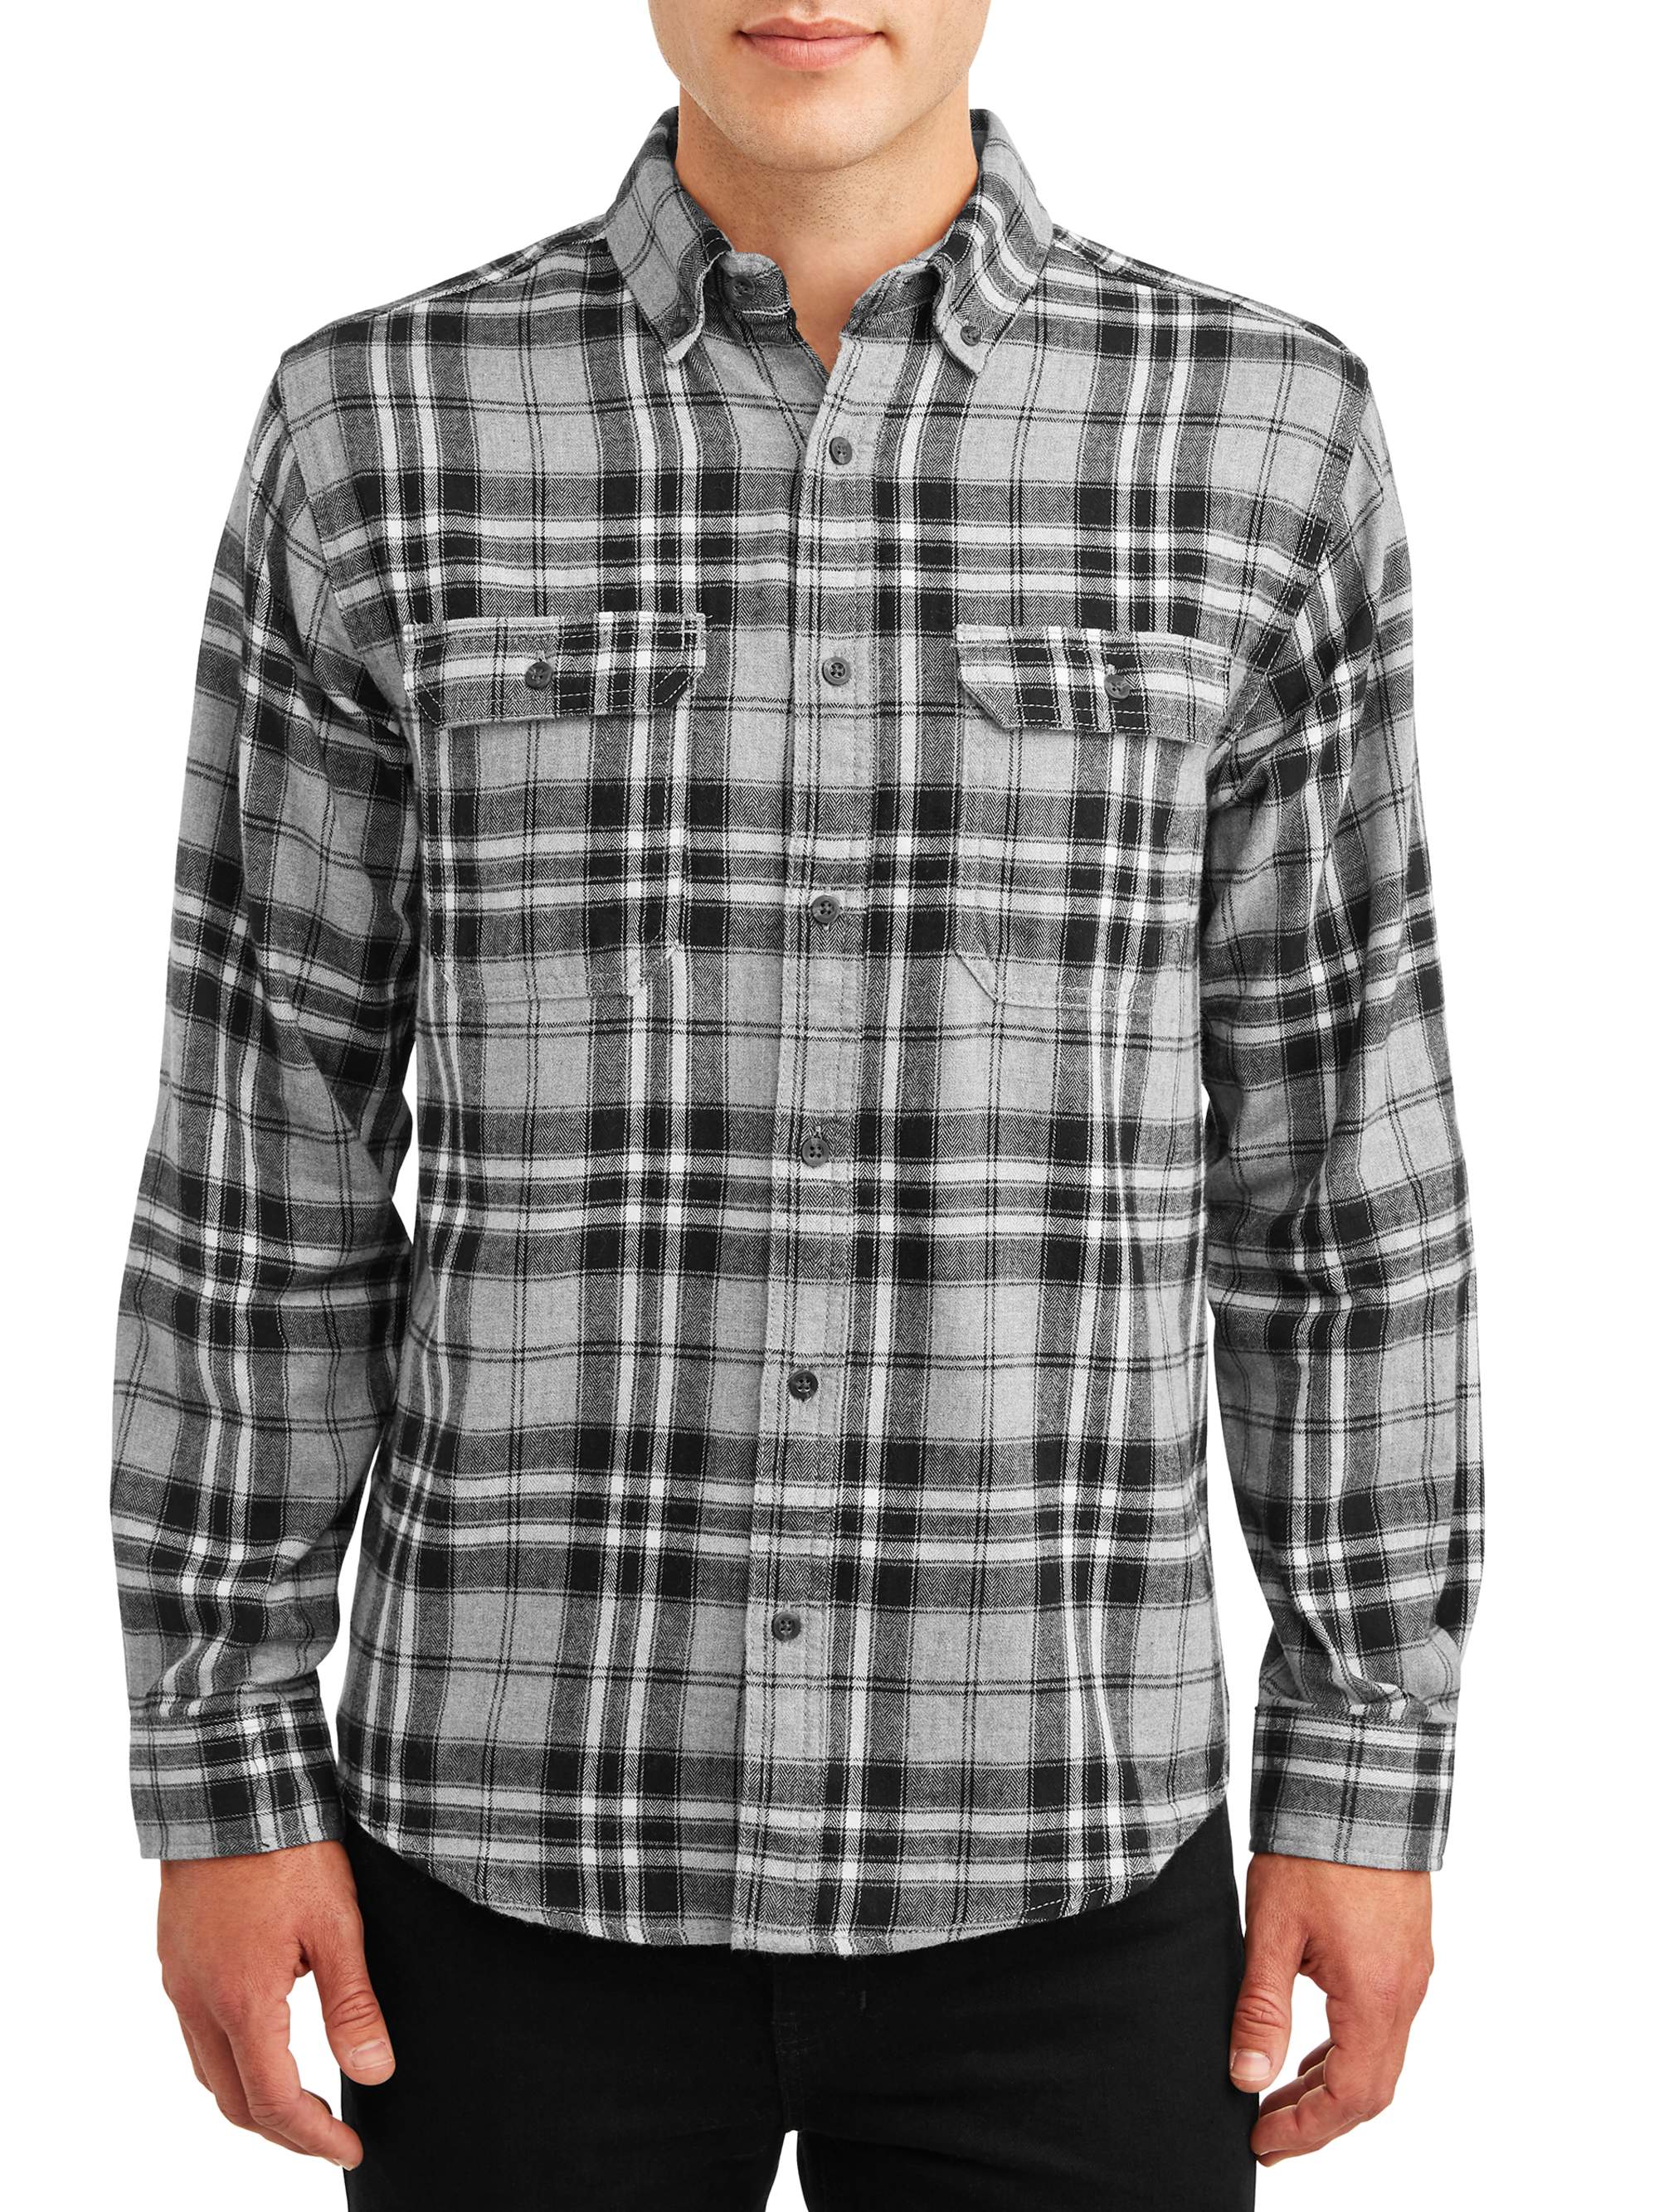 George Men's and Big Men's Long Sleeve Super Soft Flannel Shirt, up to size 3XLT - image 1 of 4